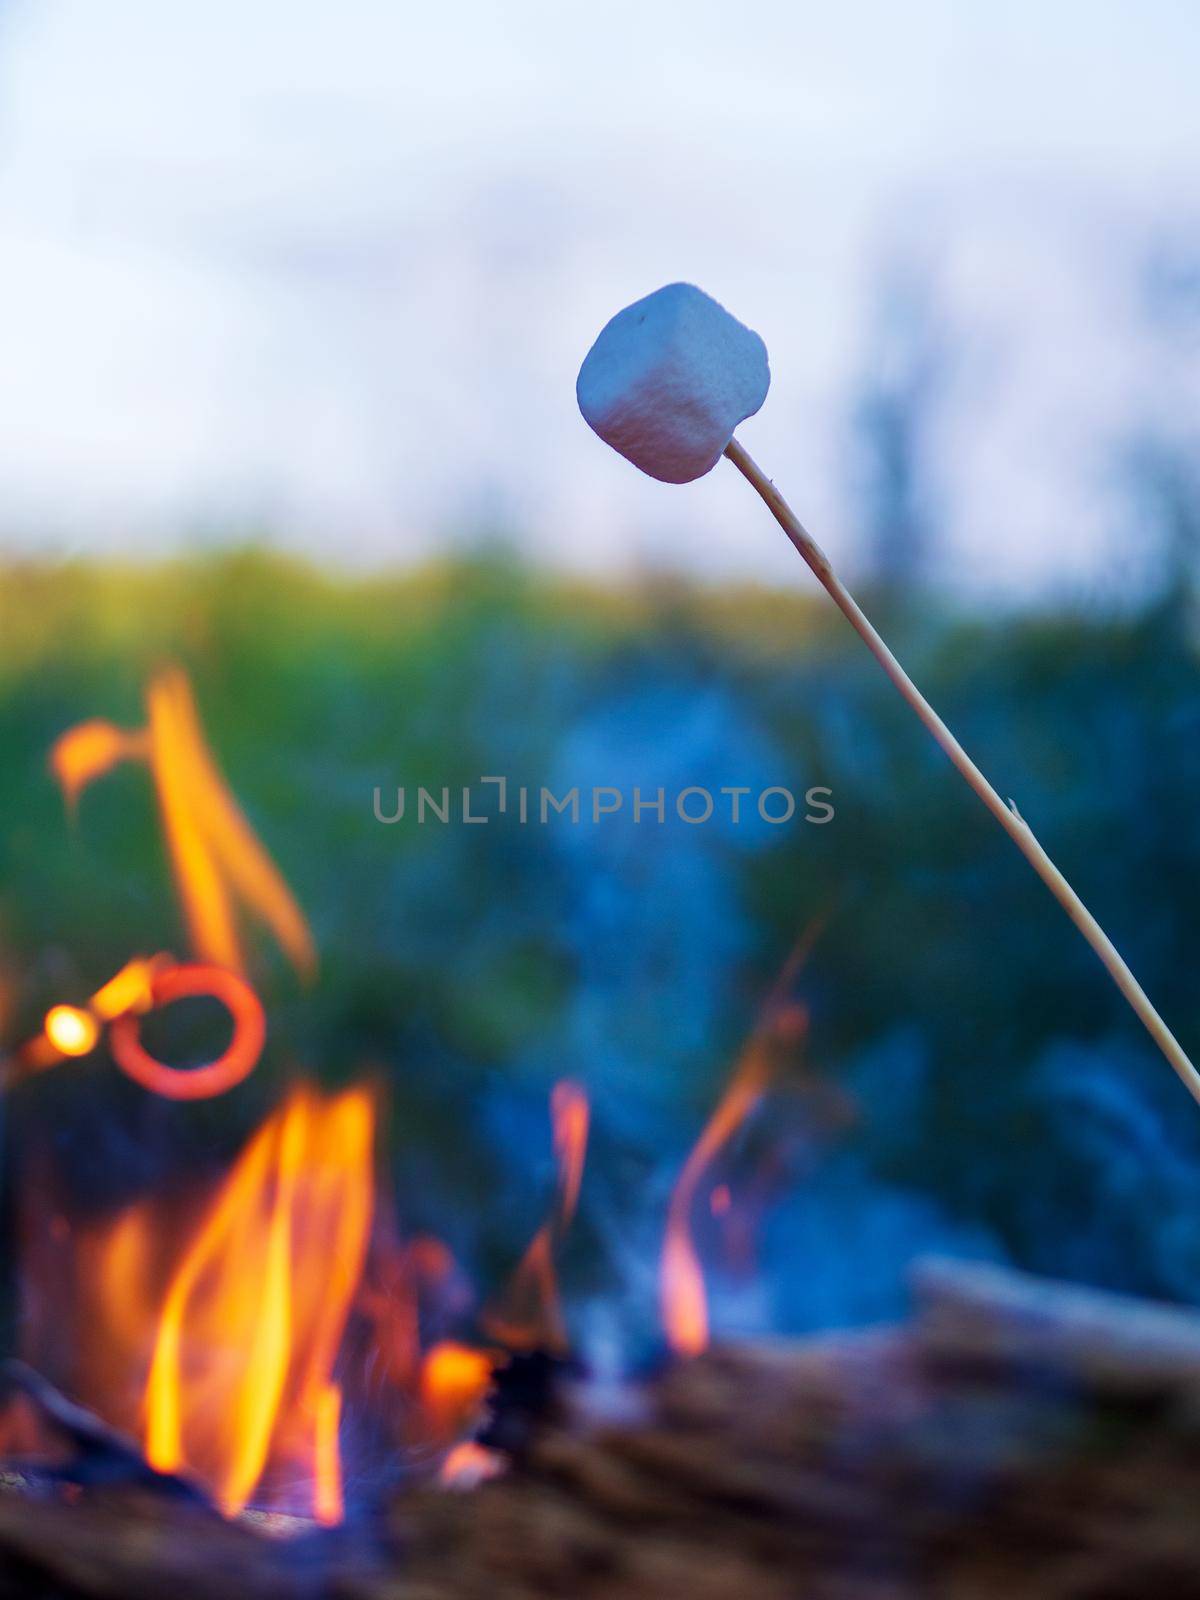 Marshmallow on skewers is fried at the stake by Andre1ns